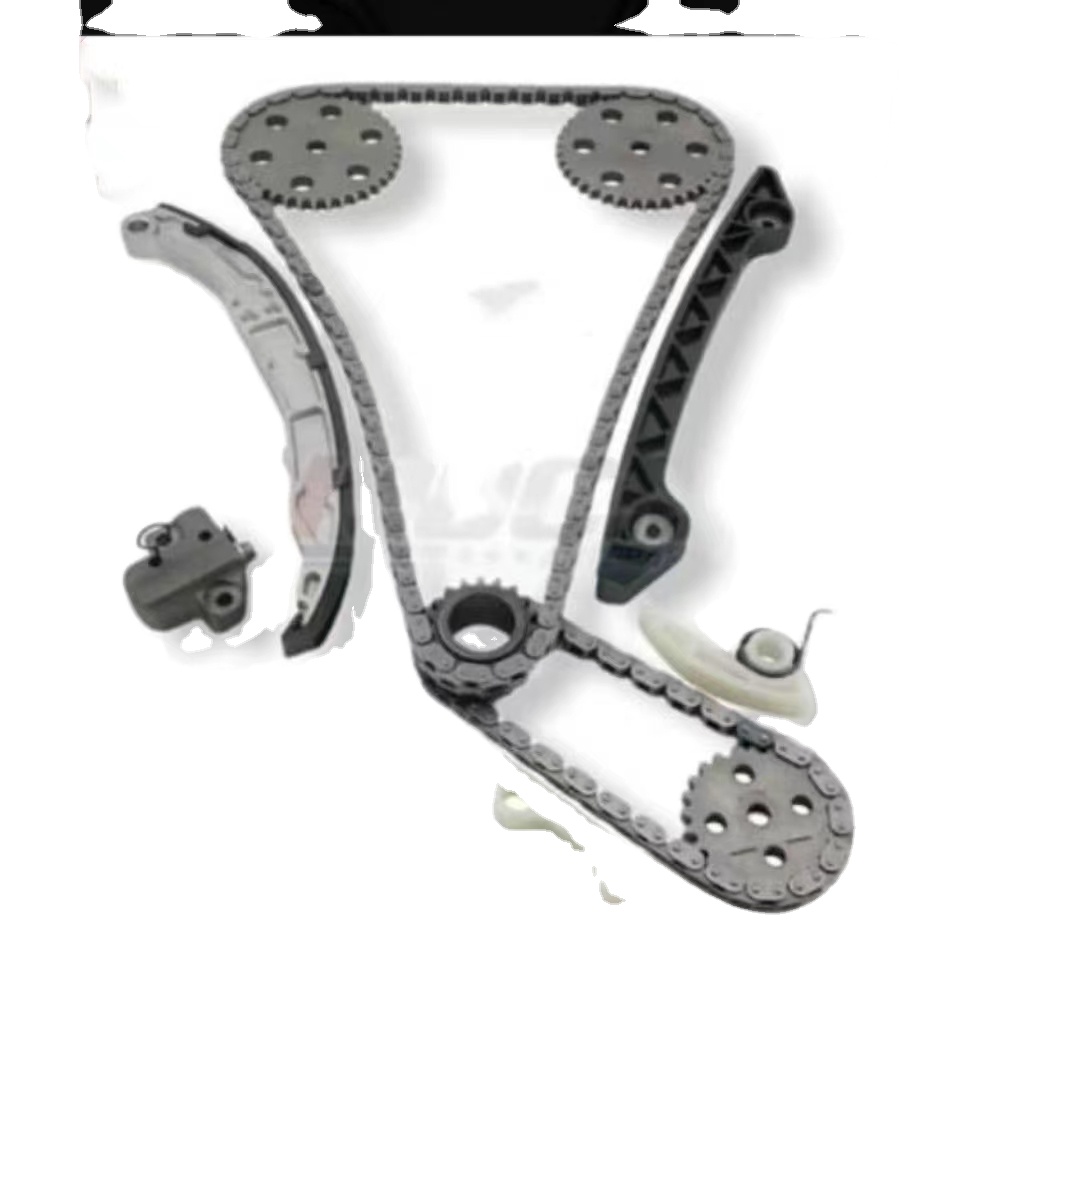 TIMING CHAIN KIT For Ford ranger 2.3 and mazda 6 2.3